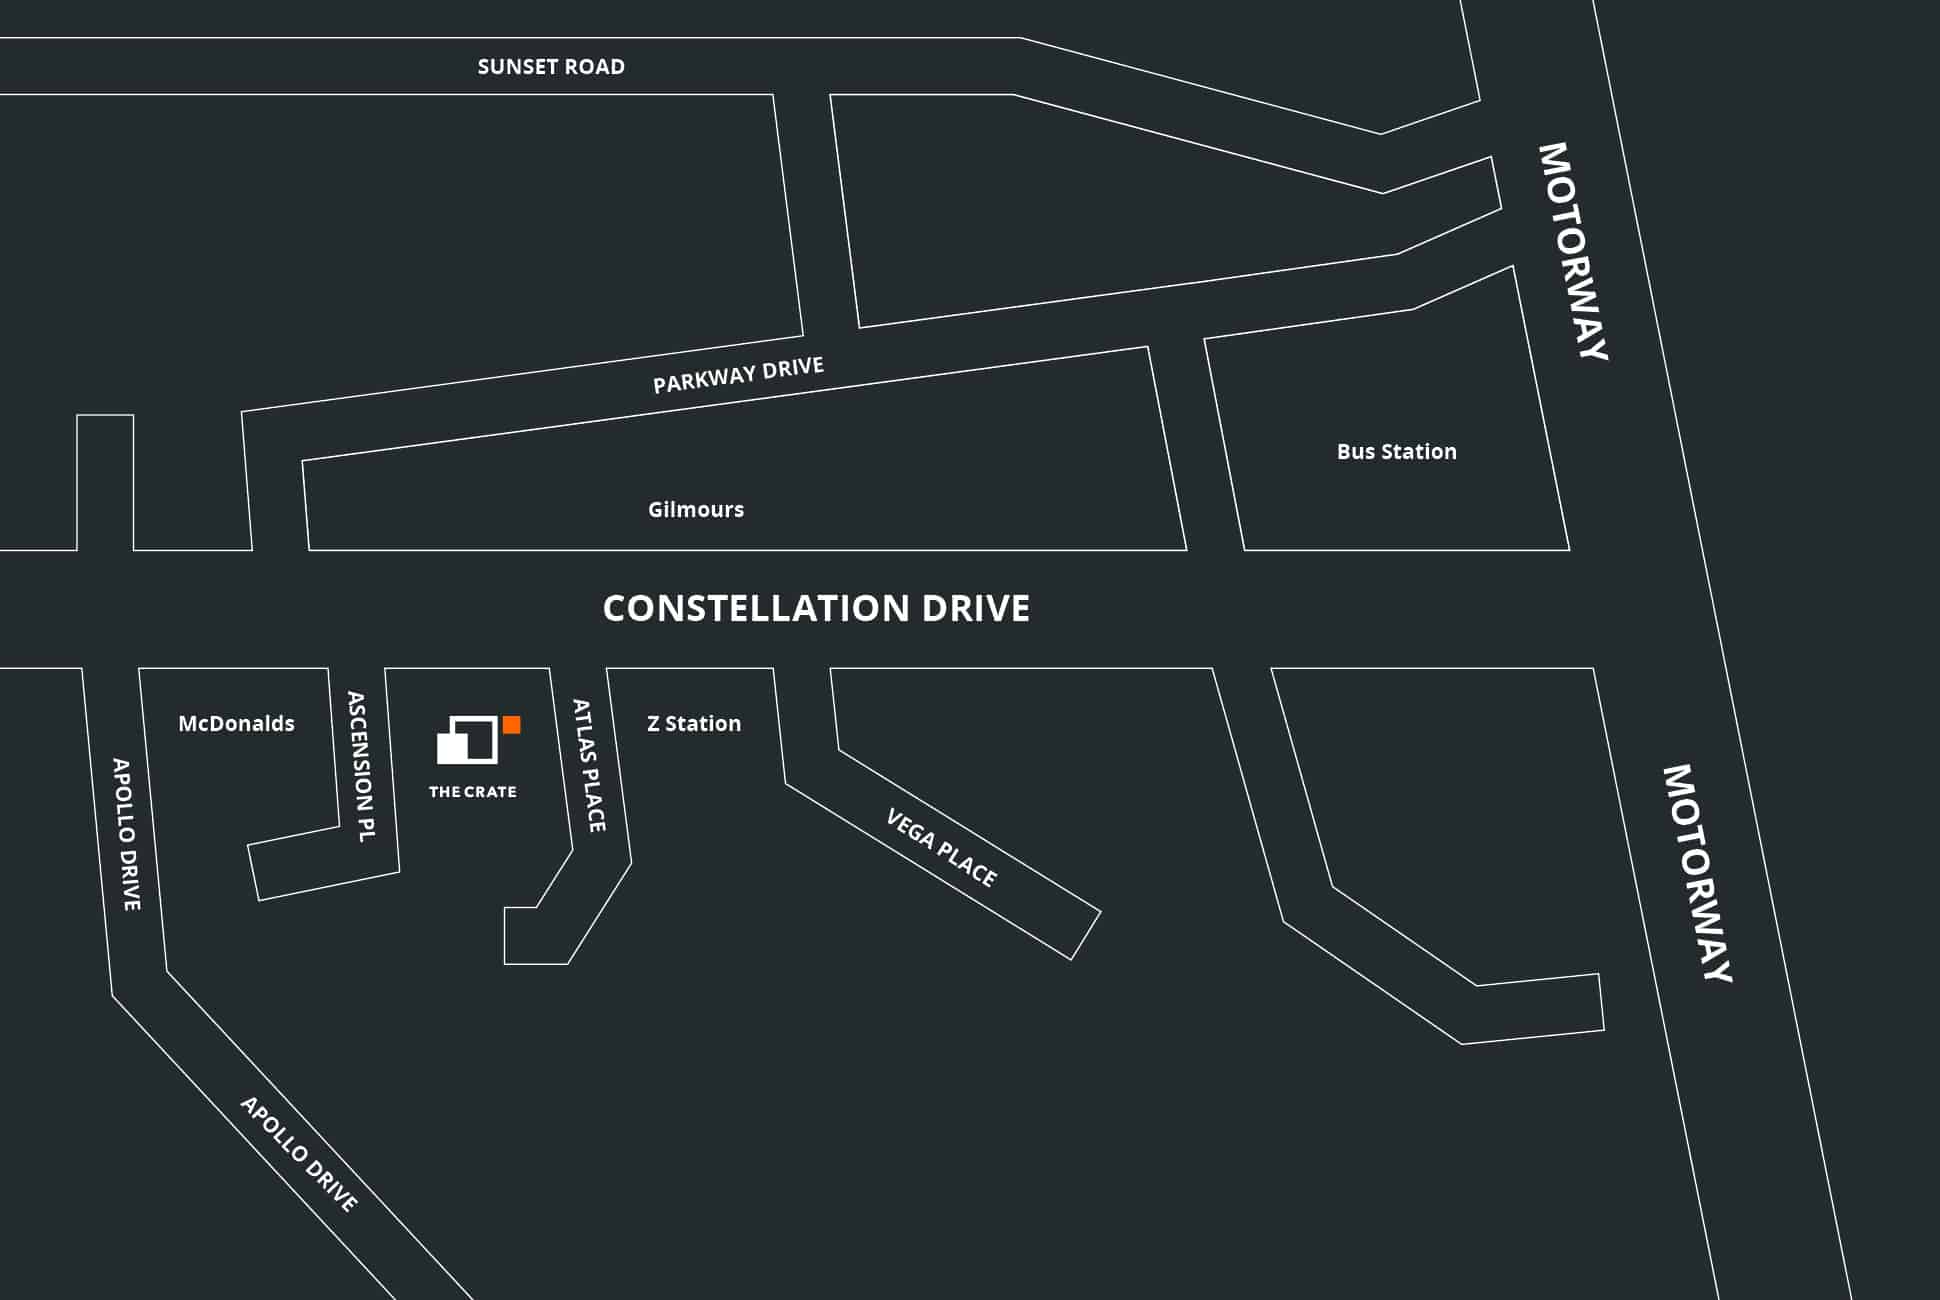 Find us on Constellation Drive.